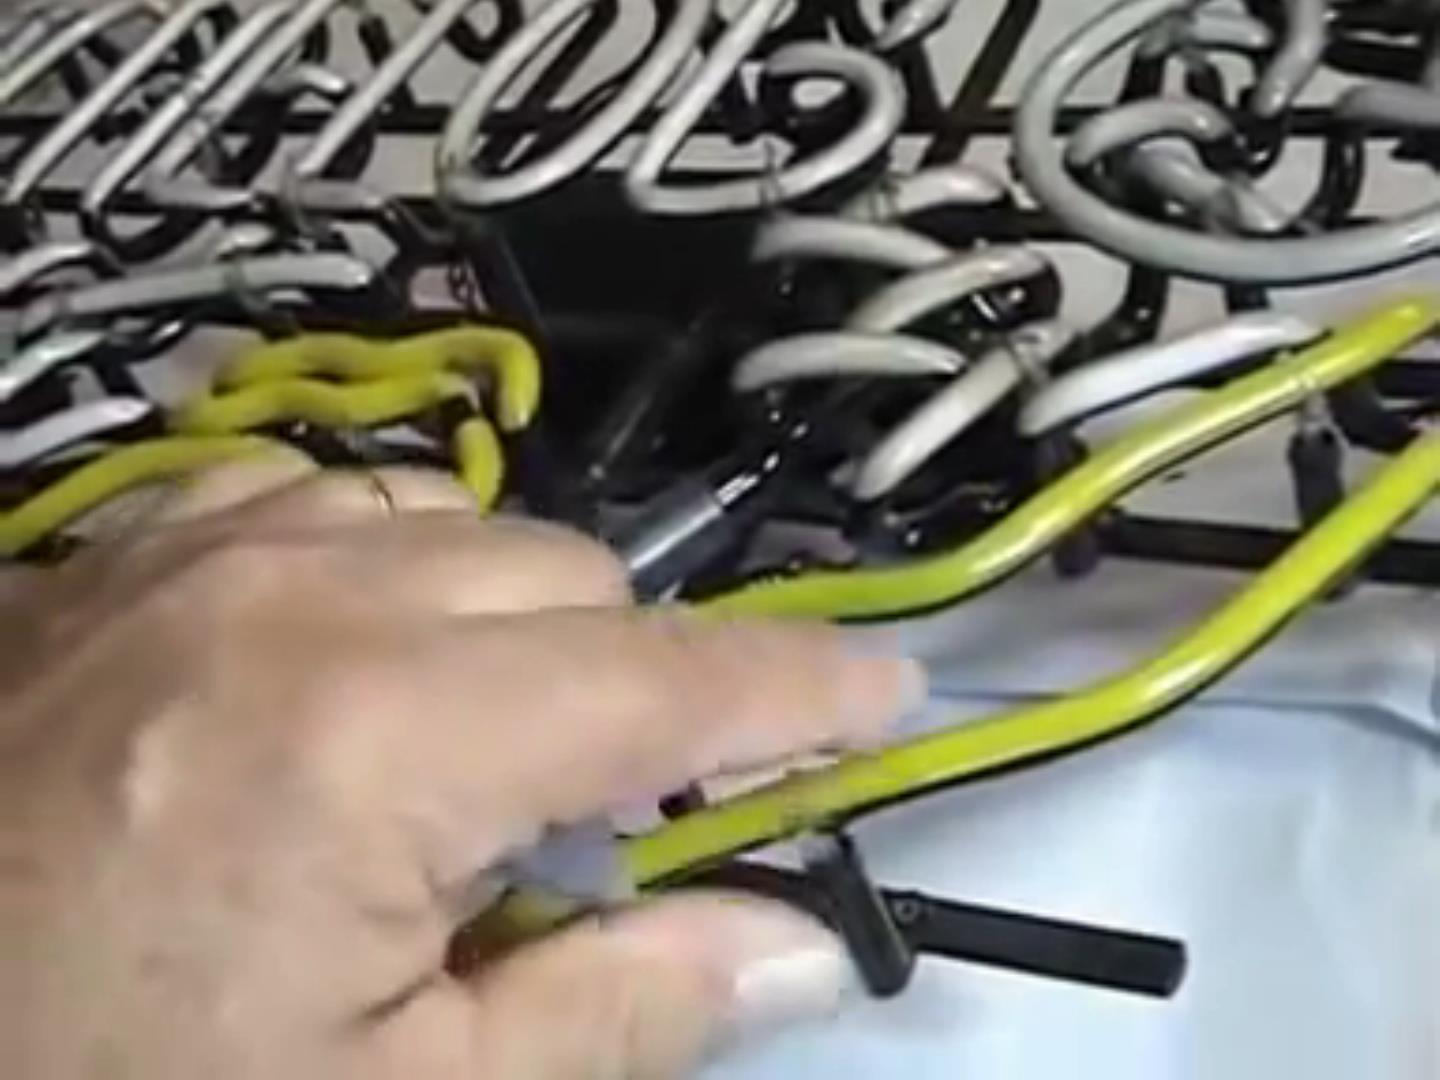 How to take out a broken section from a neon sign